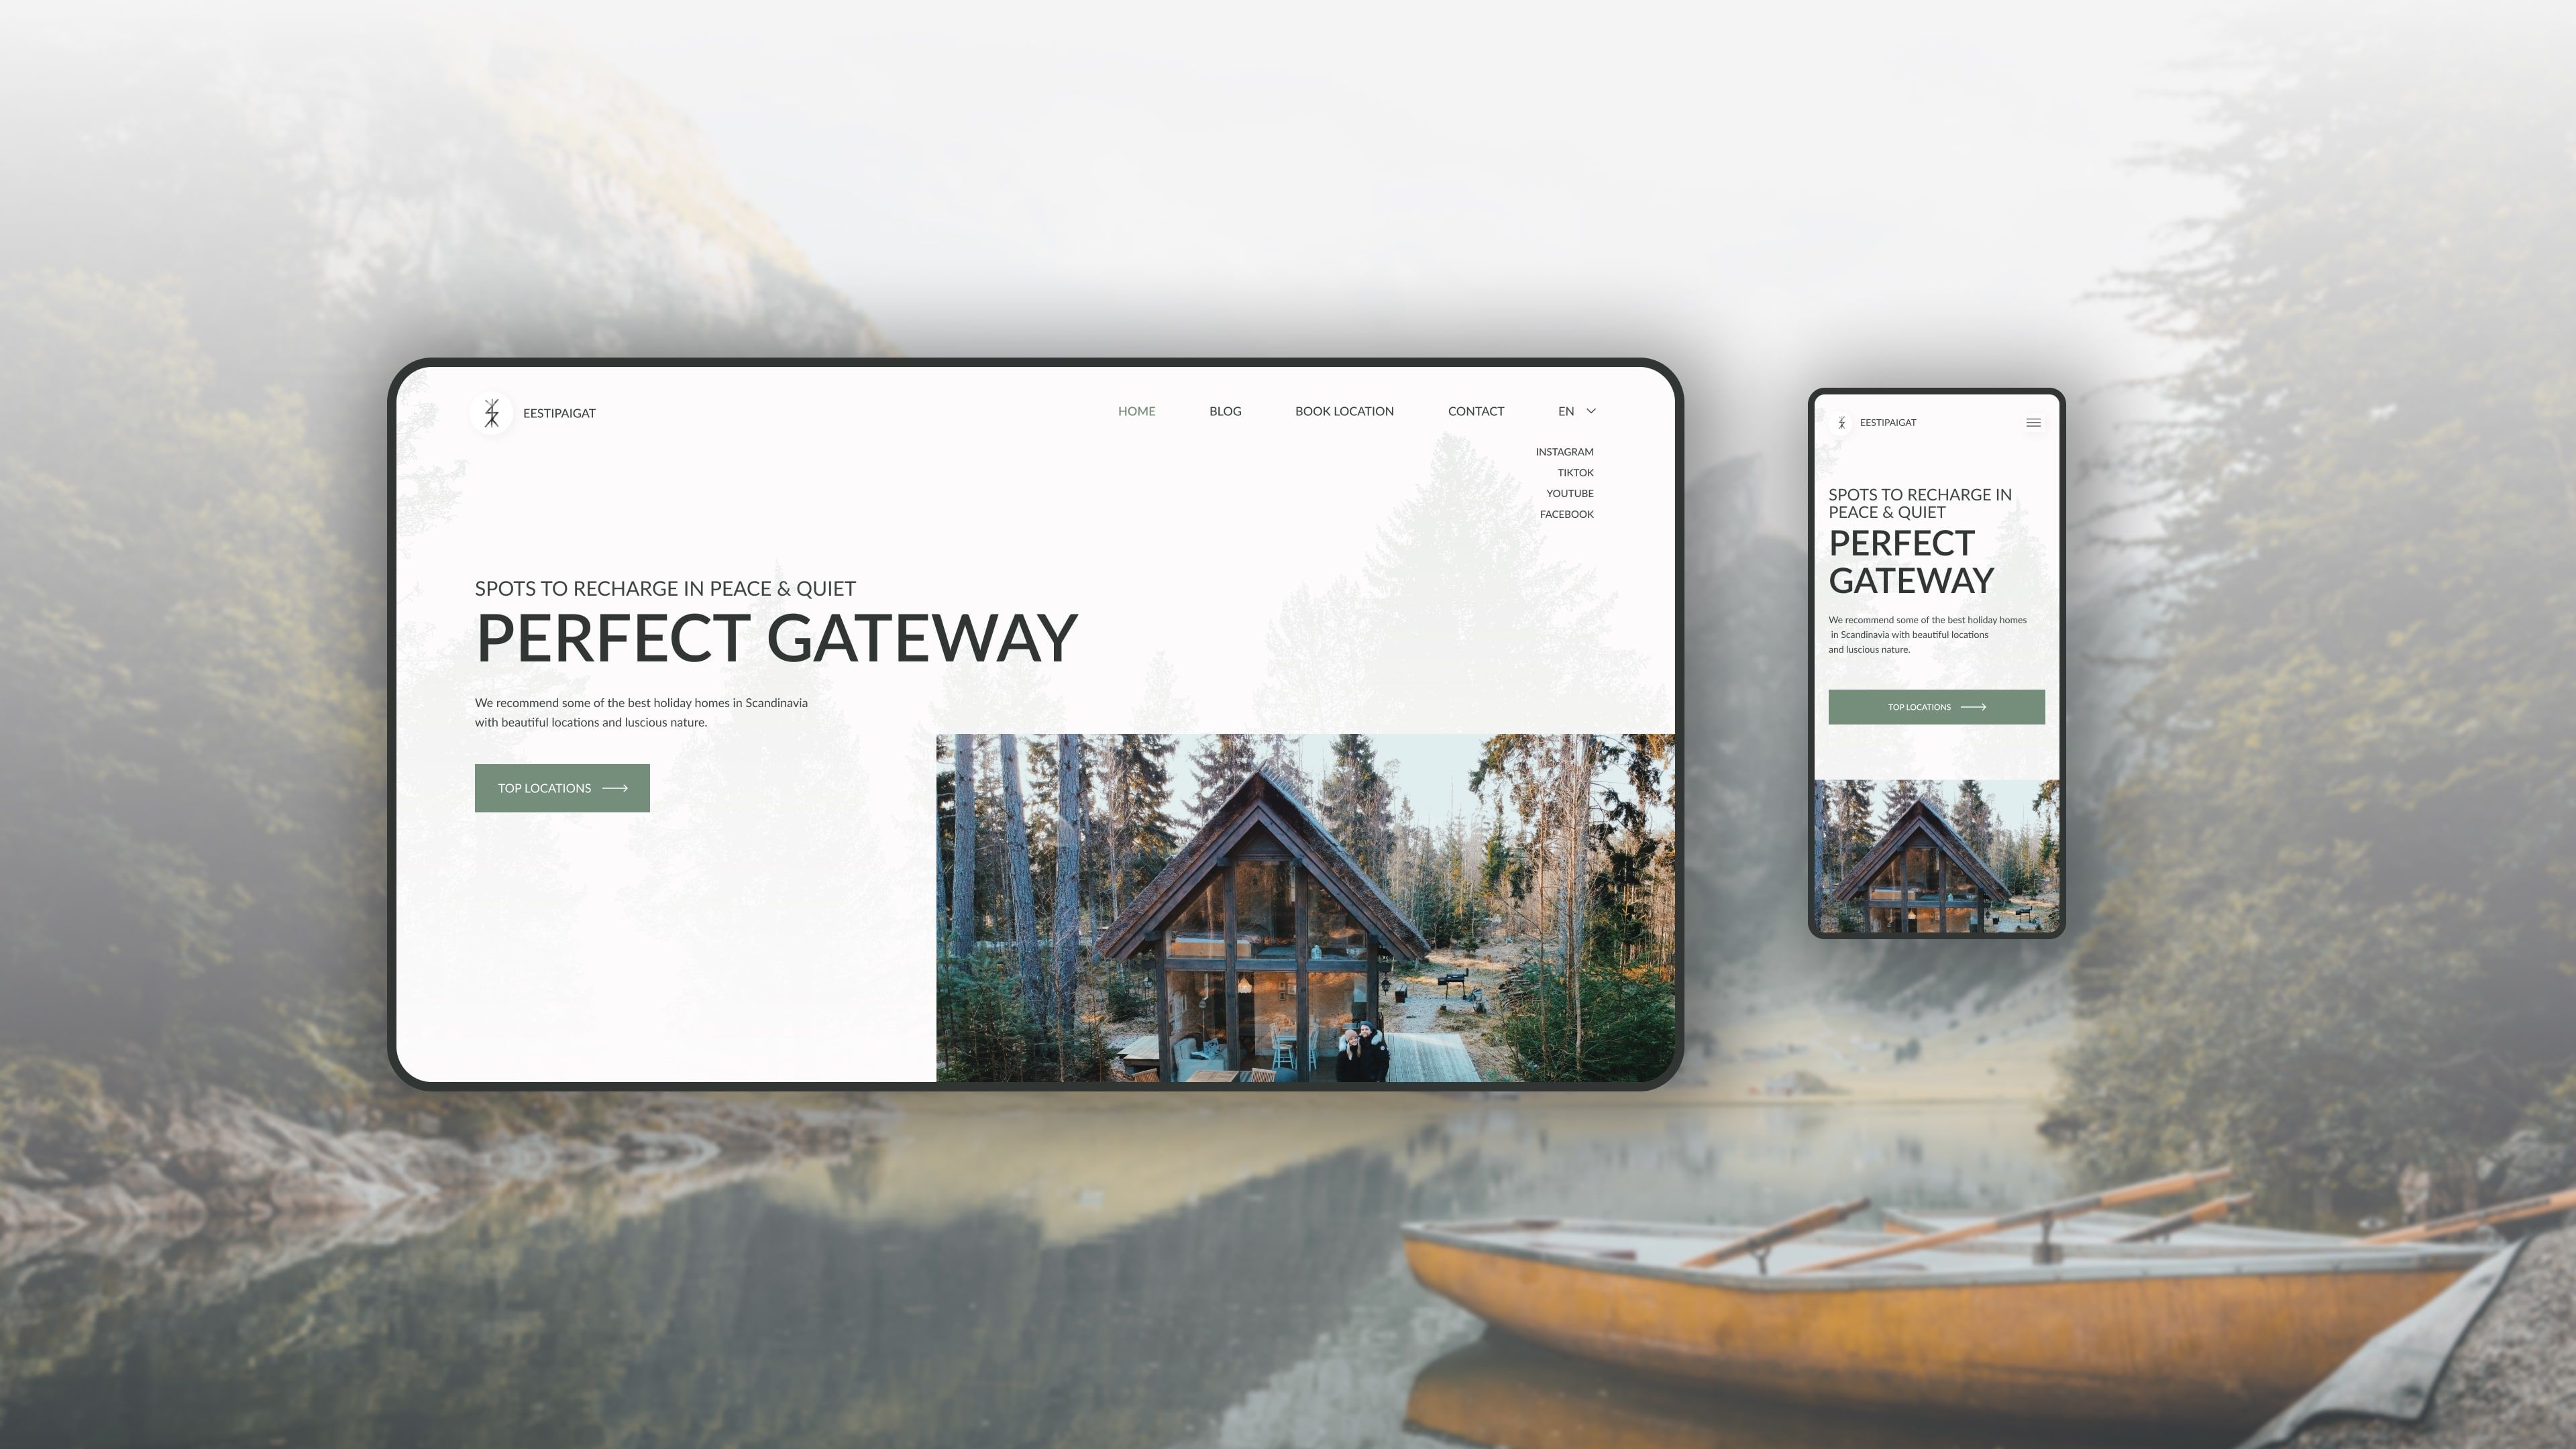 Travel page banner view mockup showing perfect gateway location